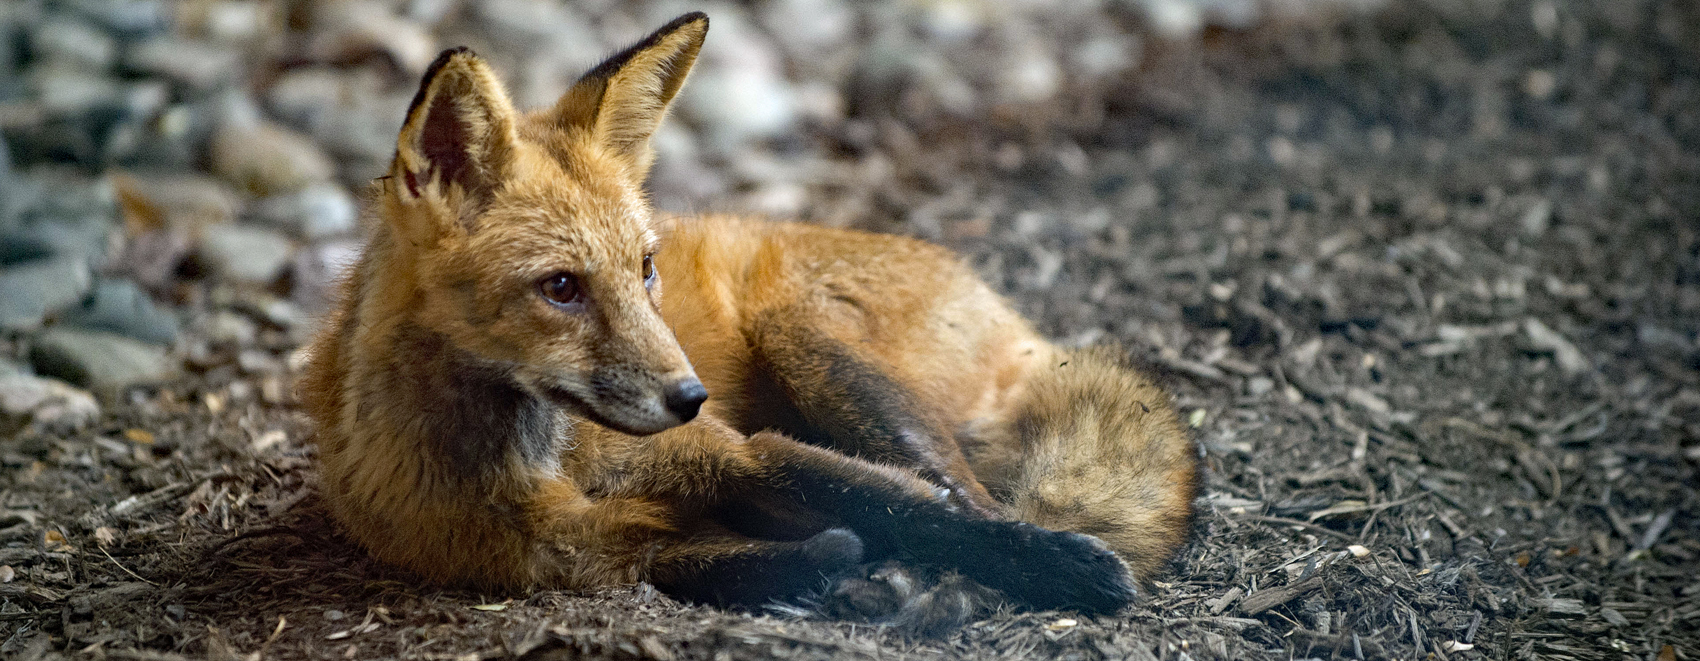 Red fox resting on the ground